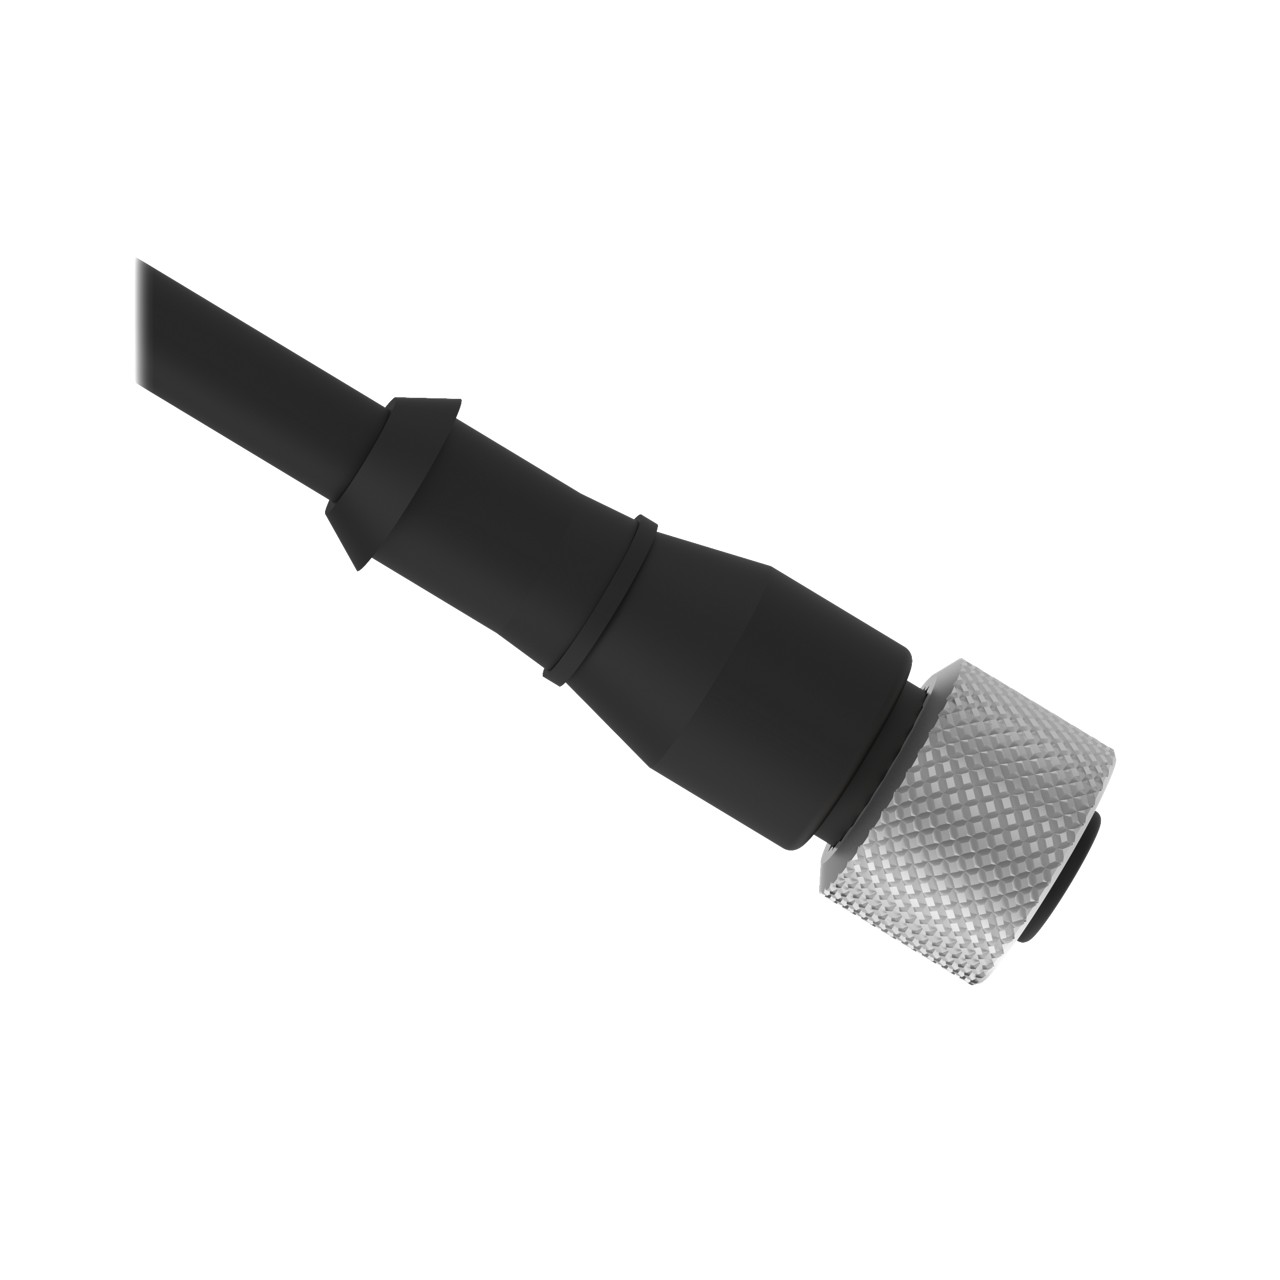 MQDC2S-830 - Cordset A-Code M12 Single Ended; 8-Pin Straight Female Connector with Shield; 10.04 m (32.94 ft) in Length; Black PVC Jacket, Nickel-Plat